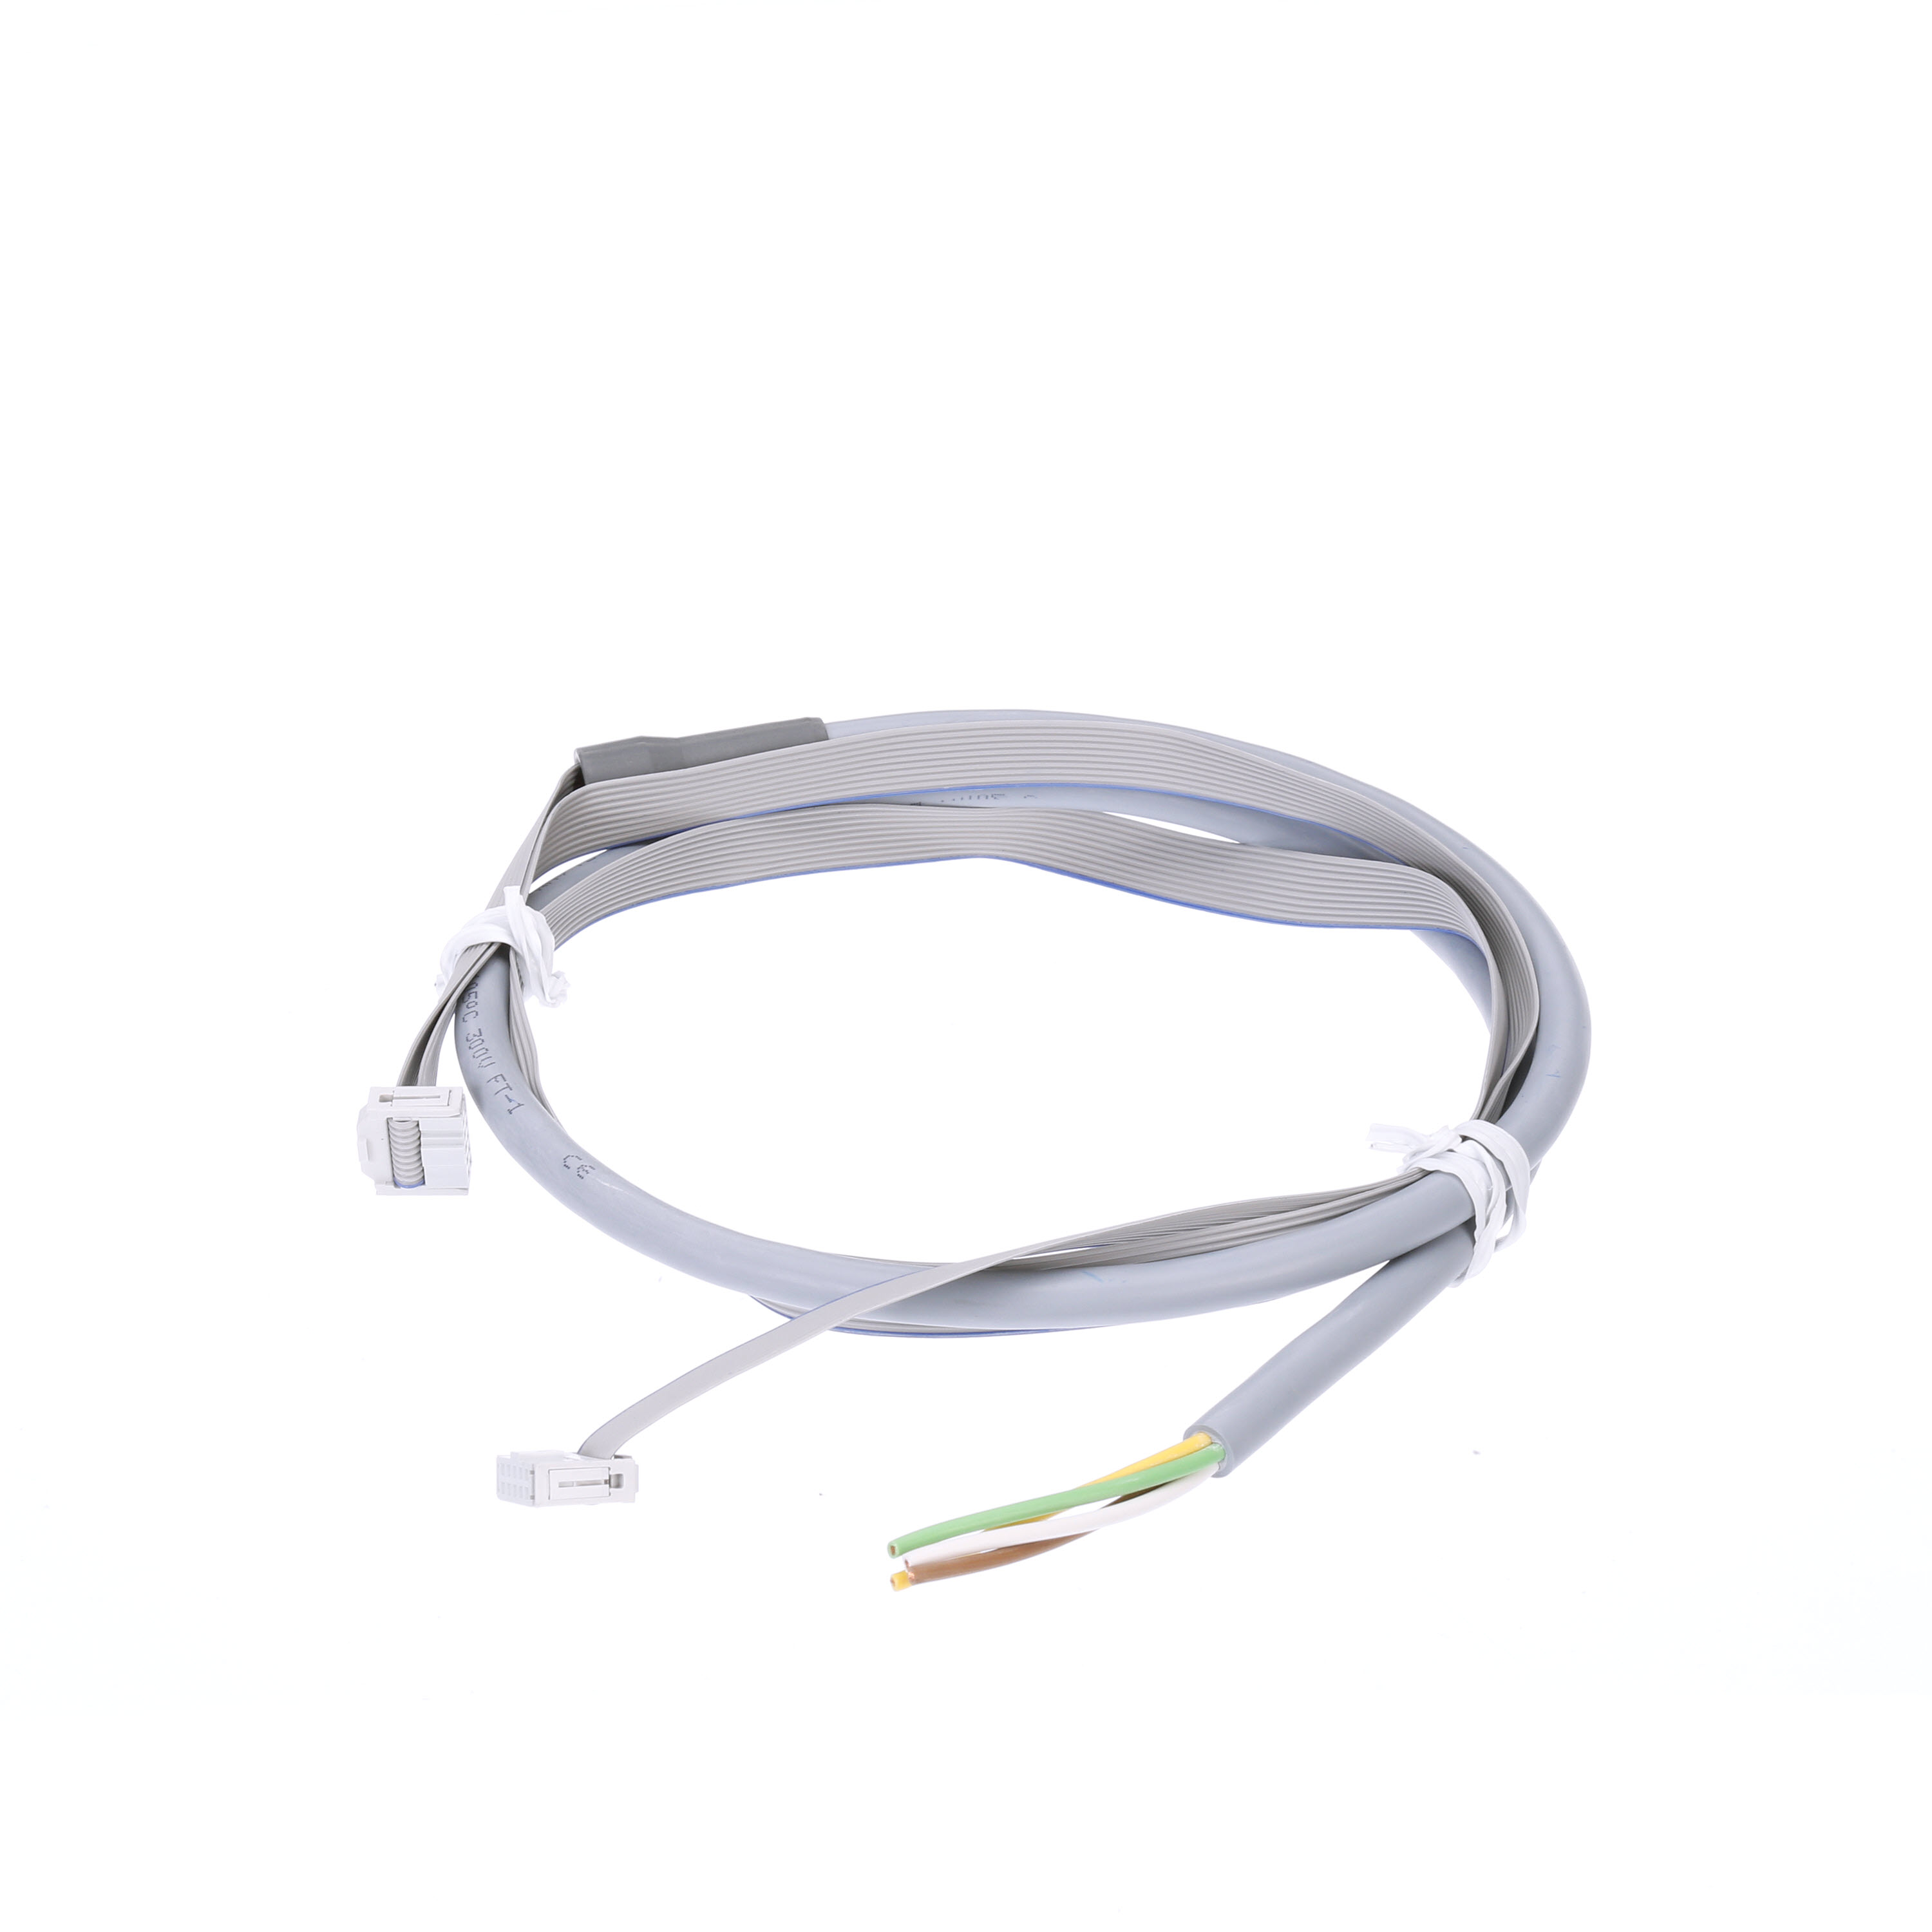 Y connection cable for use in conjunction with the initialization module length1.0m / 1.0m connects basic unit, current or current-voltage detection module and initialization module